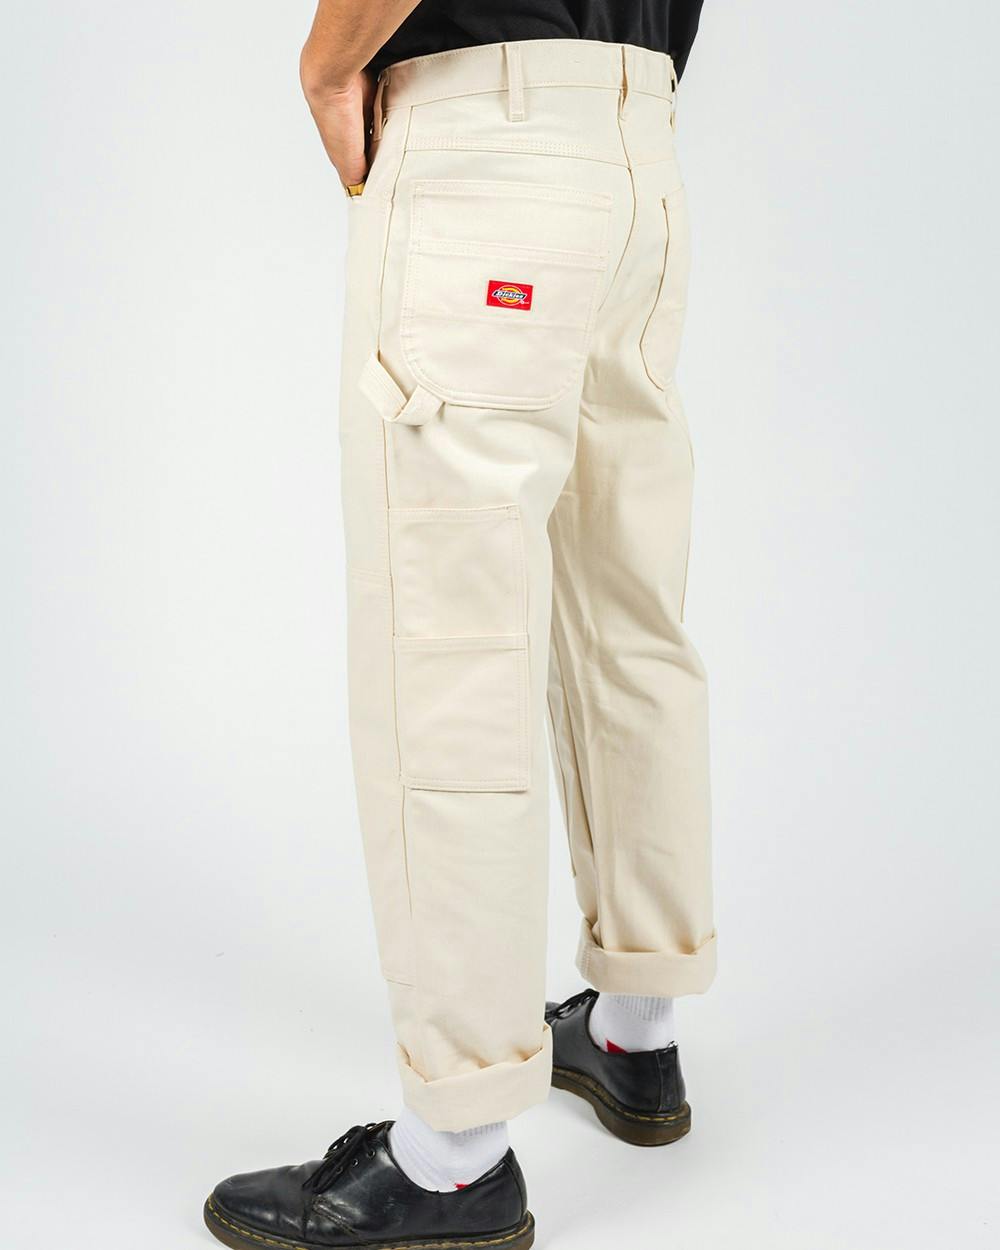 Relaxed Fit Double Knee Painter's Pant